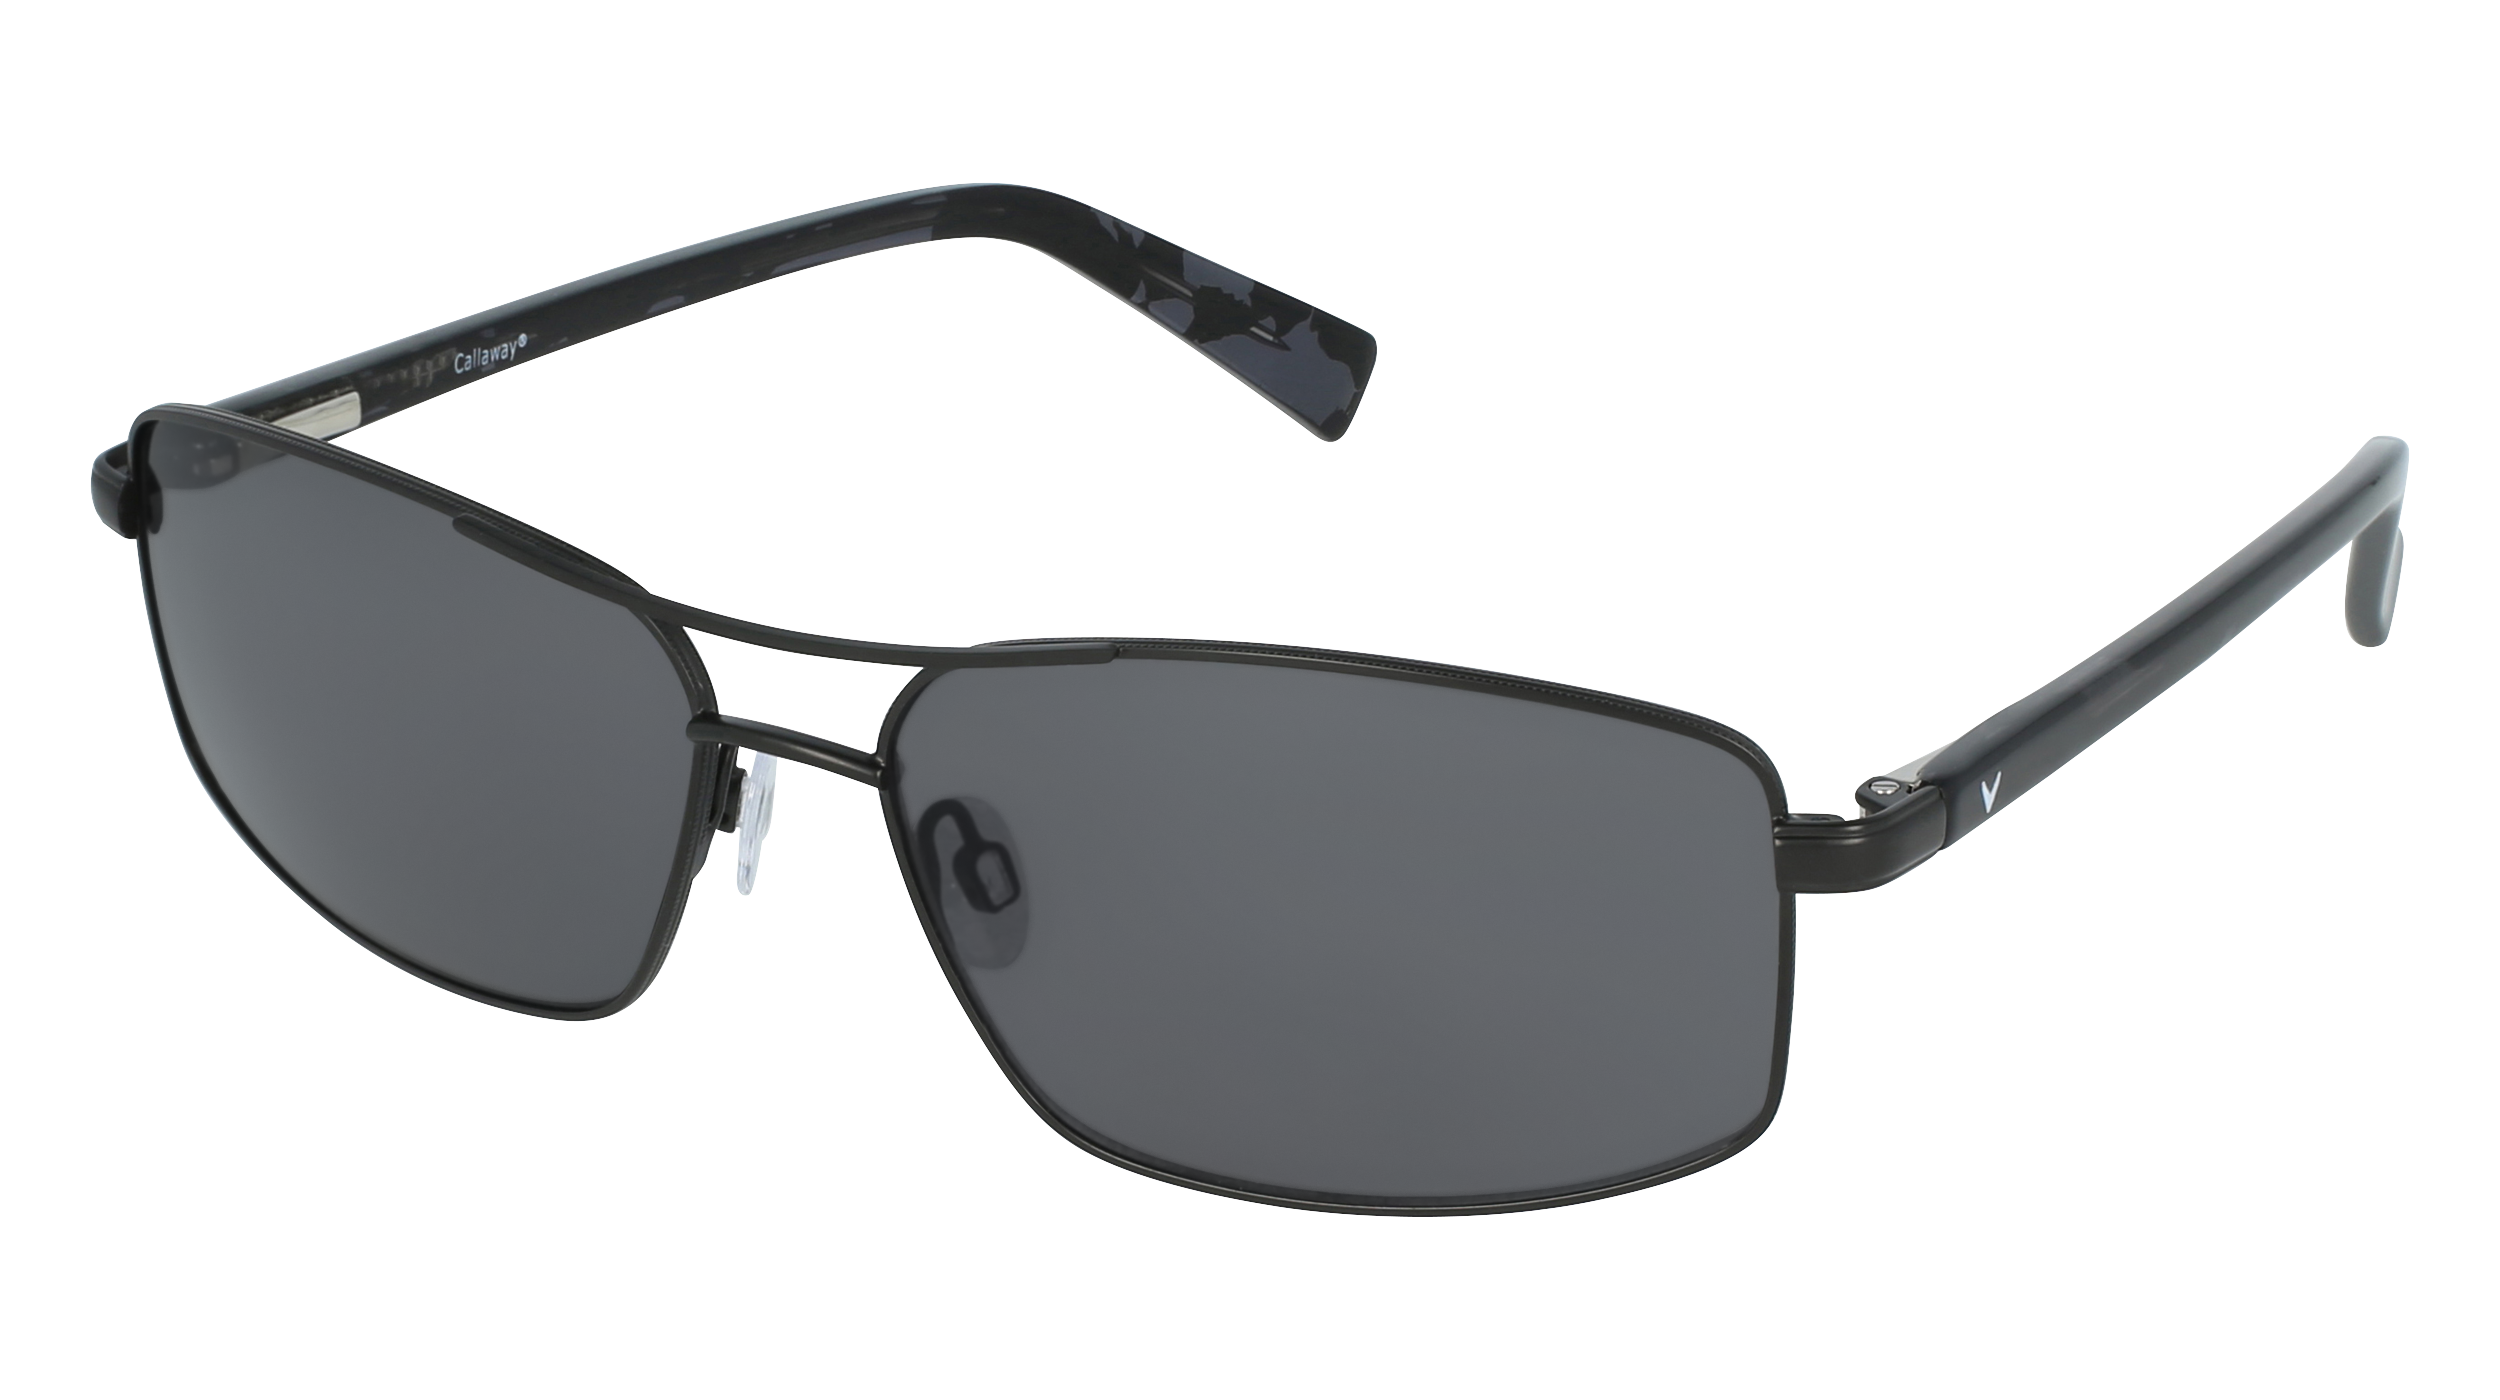 C C 08 men's sunglasses (from the side)